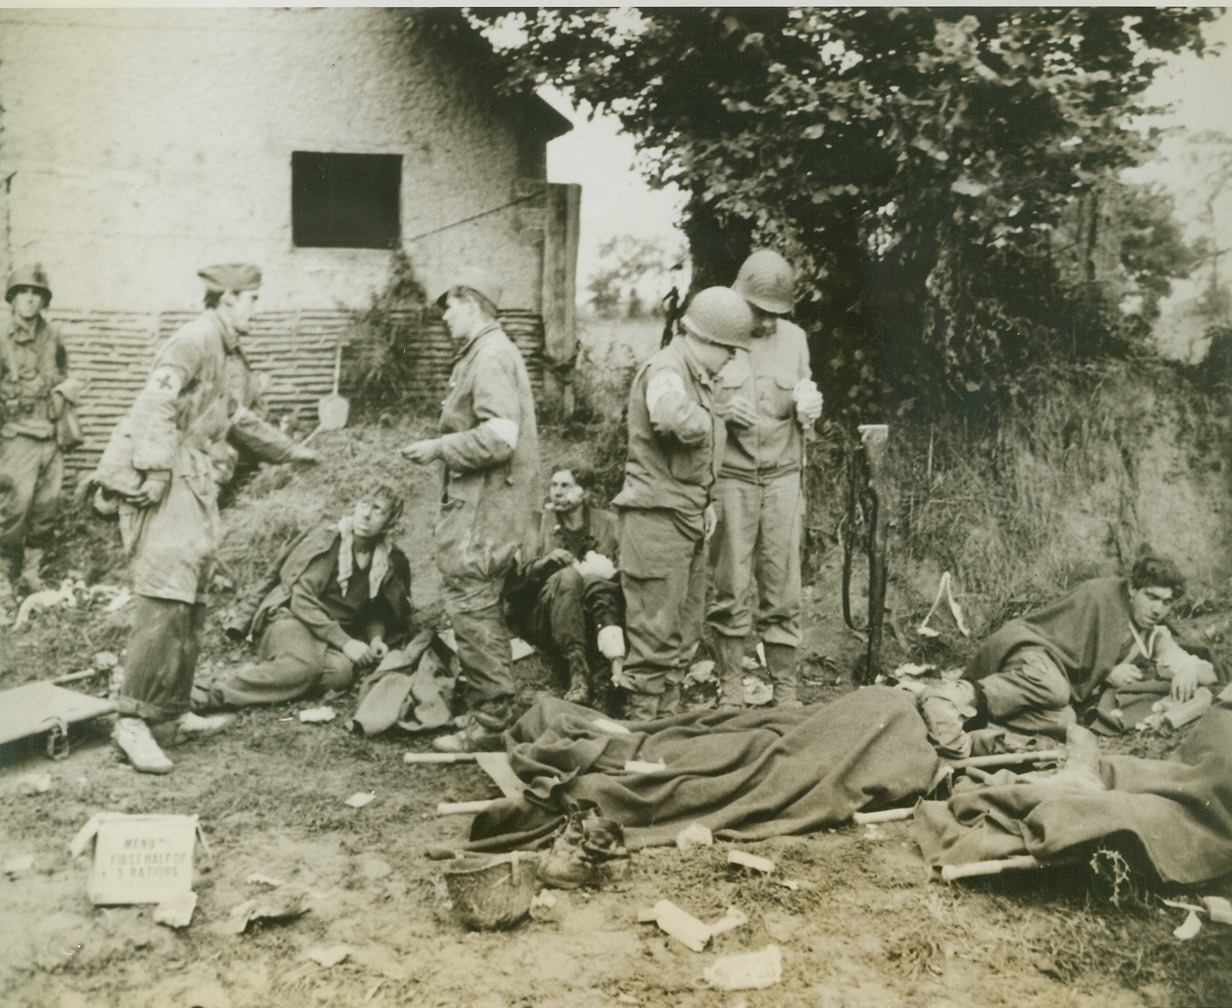 German Prisoners Get Medical Aid, 7/16/1944. St. Lo, France—While two American medical officers quietly go about their job of giving a blood transfusion to a wounded German prisoner (right), two not-so-calm German medical corpsmen discuss in boisterous tones the treatment to be given to a wounded comrade, while the poor fellow under discussion looks at them with unmasked fright. The scene is a temporary dressing station in the St. Lo sector.  Credit: ACME; St. Lo, France—While two American medical officers quietly go about their job of giving a blood transfusion to a wounded German prisoner (right), two not-so-calm German medical corpsmen discuss in boisterous tones the treatment to be given to a wounded comrade, while the poor fellow under discussion looks at them with unmasked fright. The scene is a temporary dressing station in the St. Lo sector.  Credit: ACME;